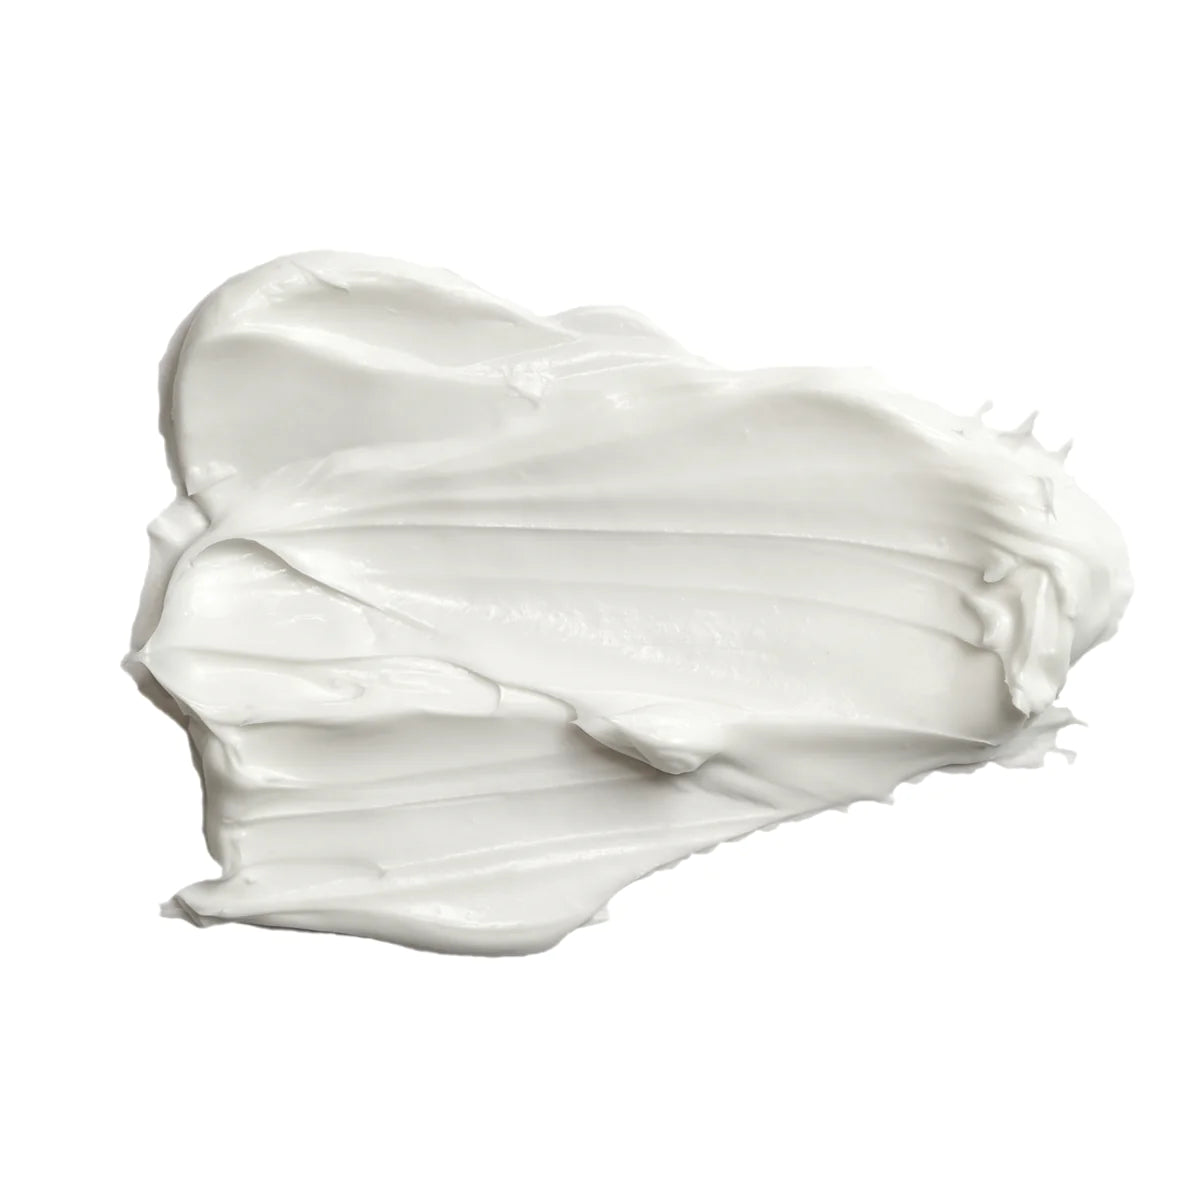 Acure Brightening Night Cream on a white background.